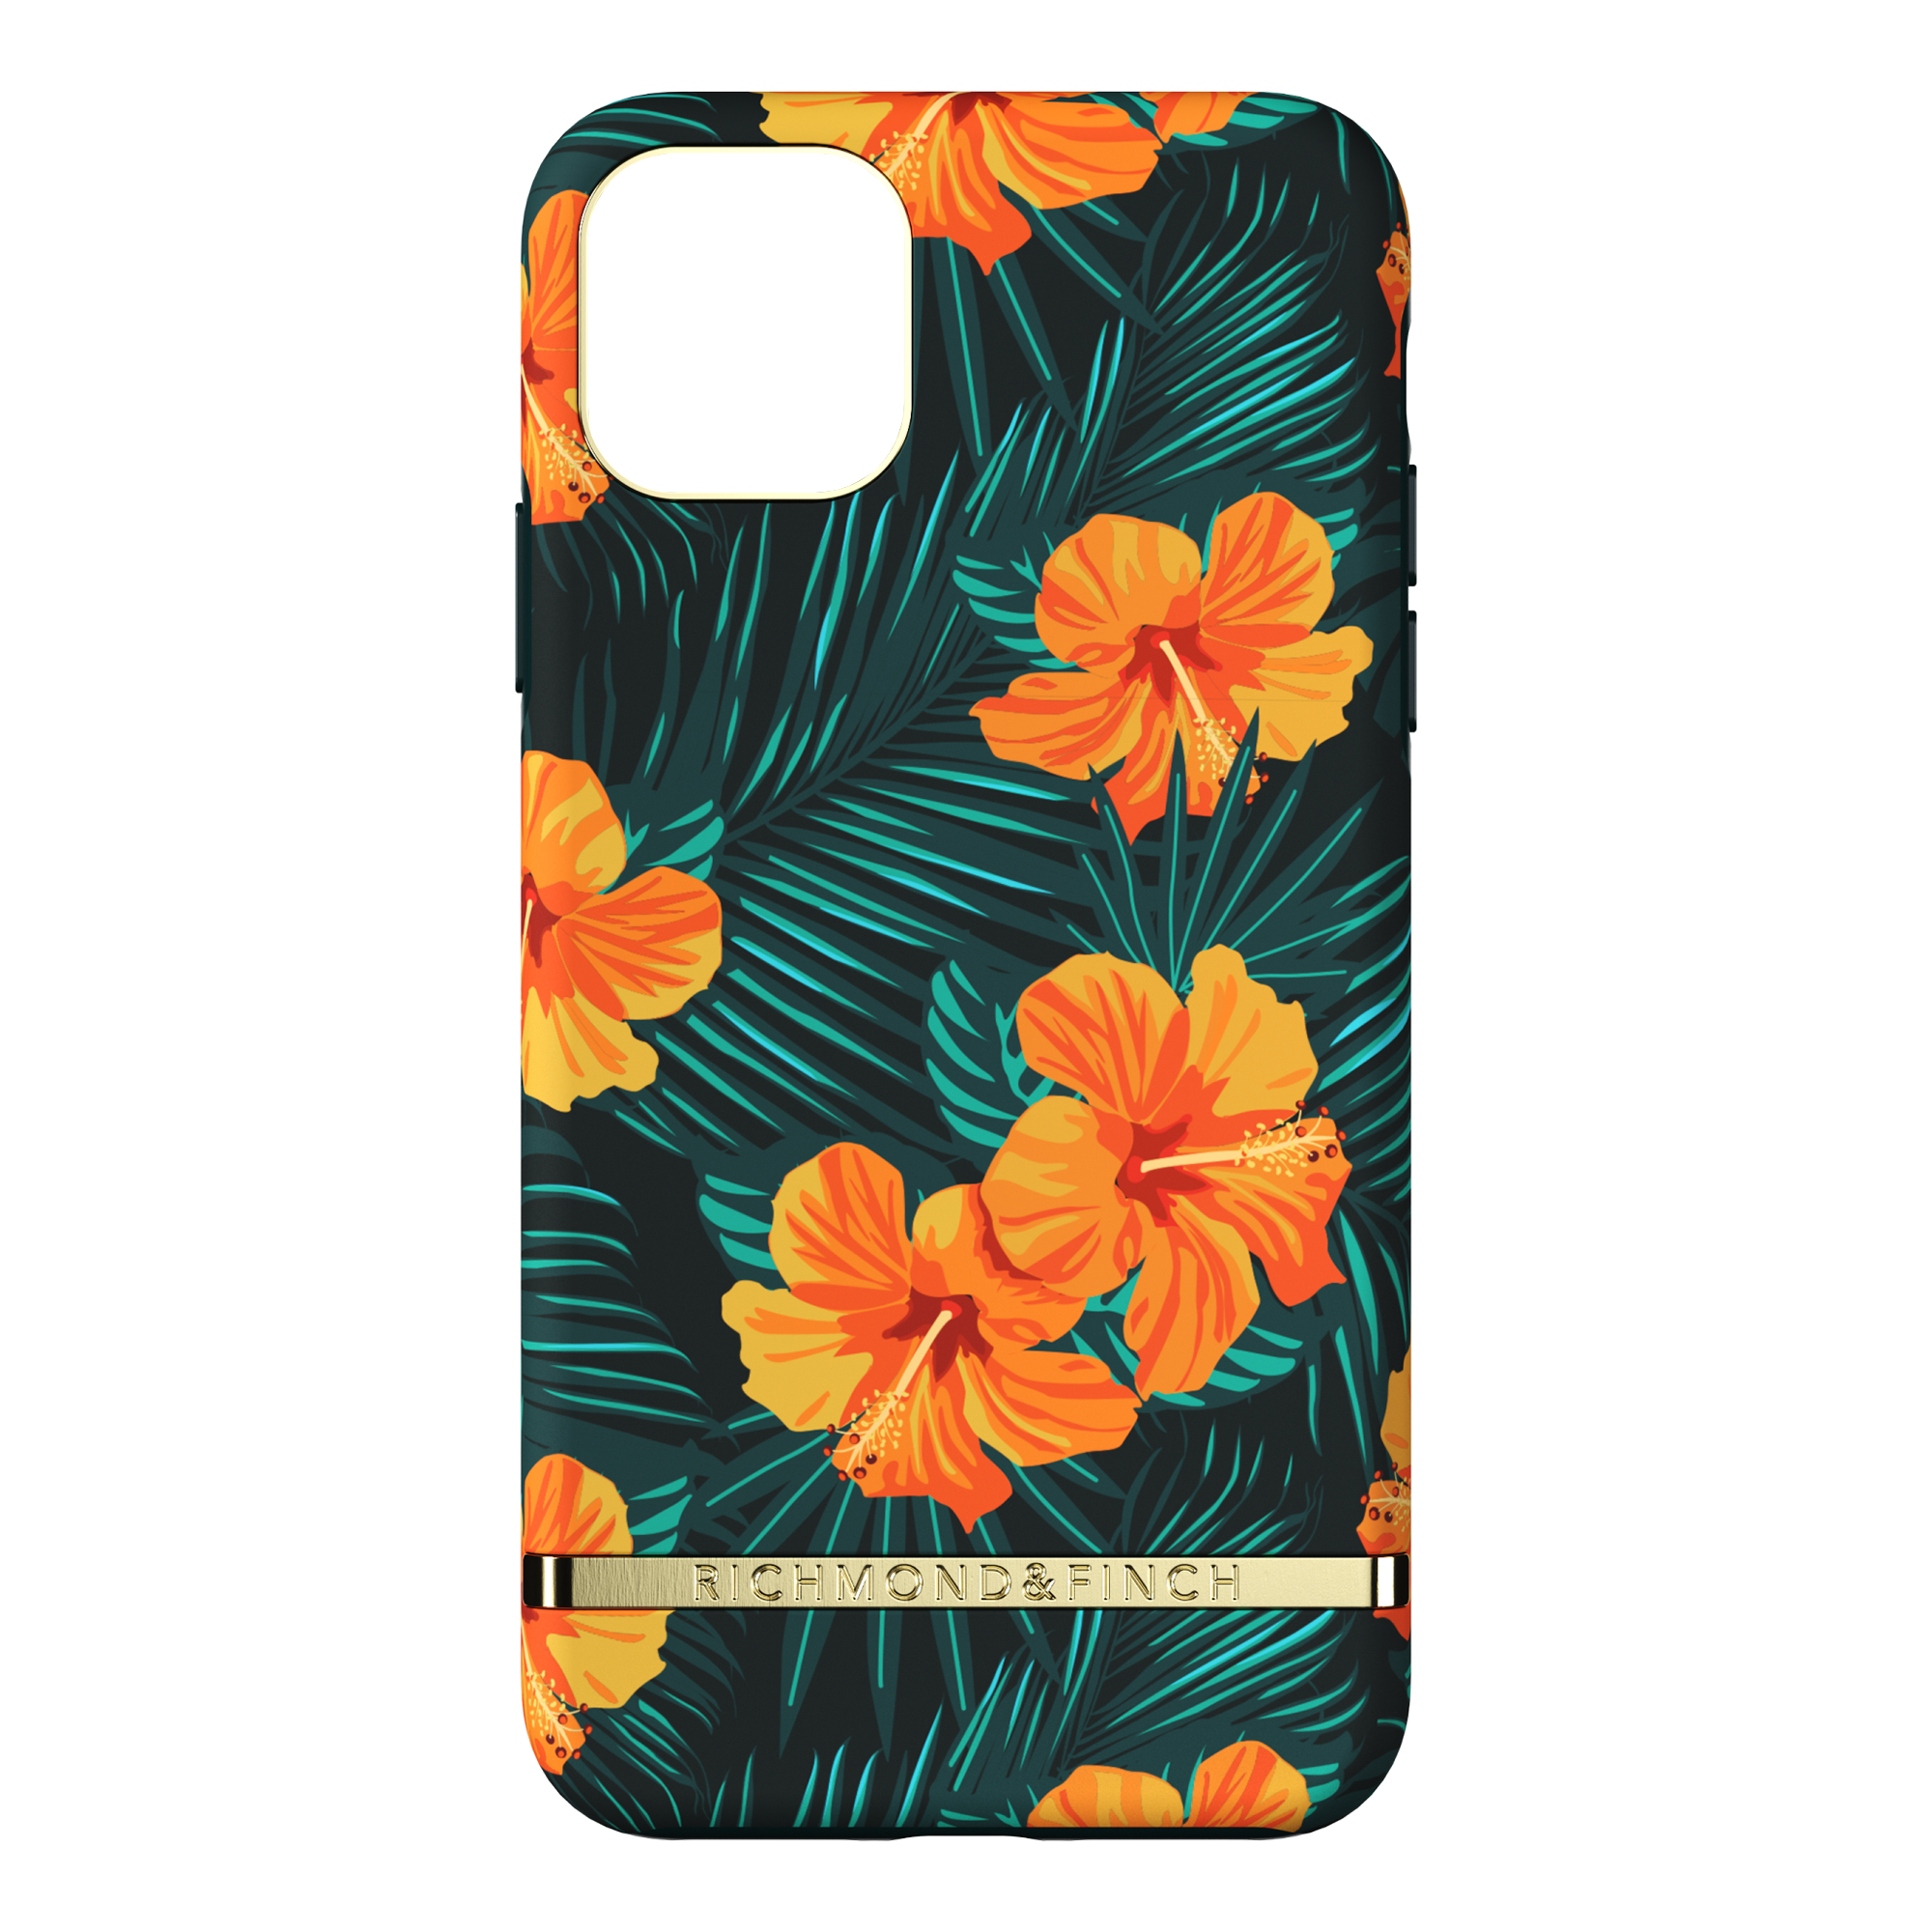 & COLOURFUL MAX, RICHMOND FINCH Pro iPhone APPLE, PRO IPHONE 11 11 max, Hibiscus Backcover, Orange